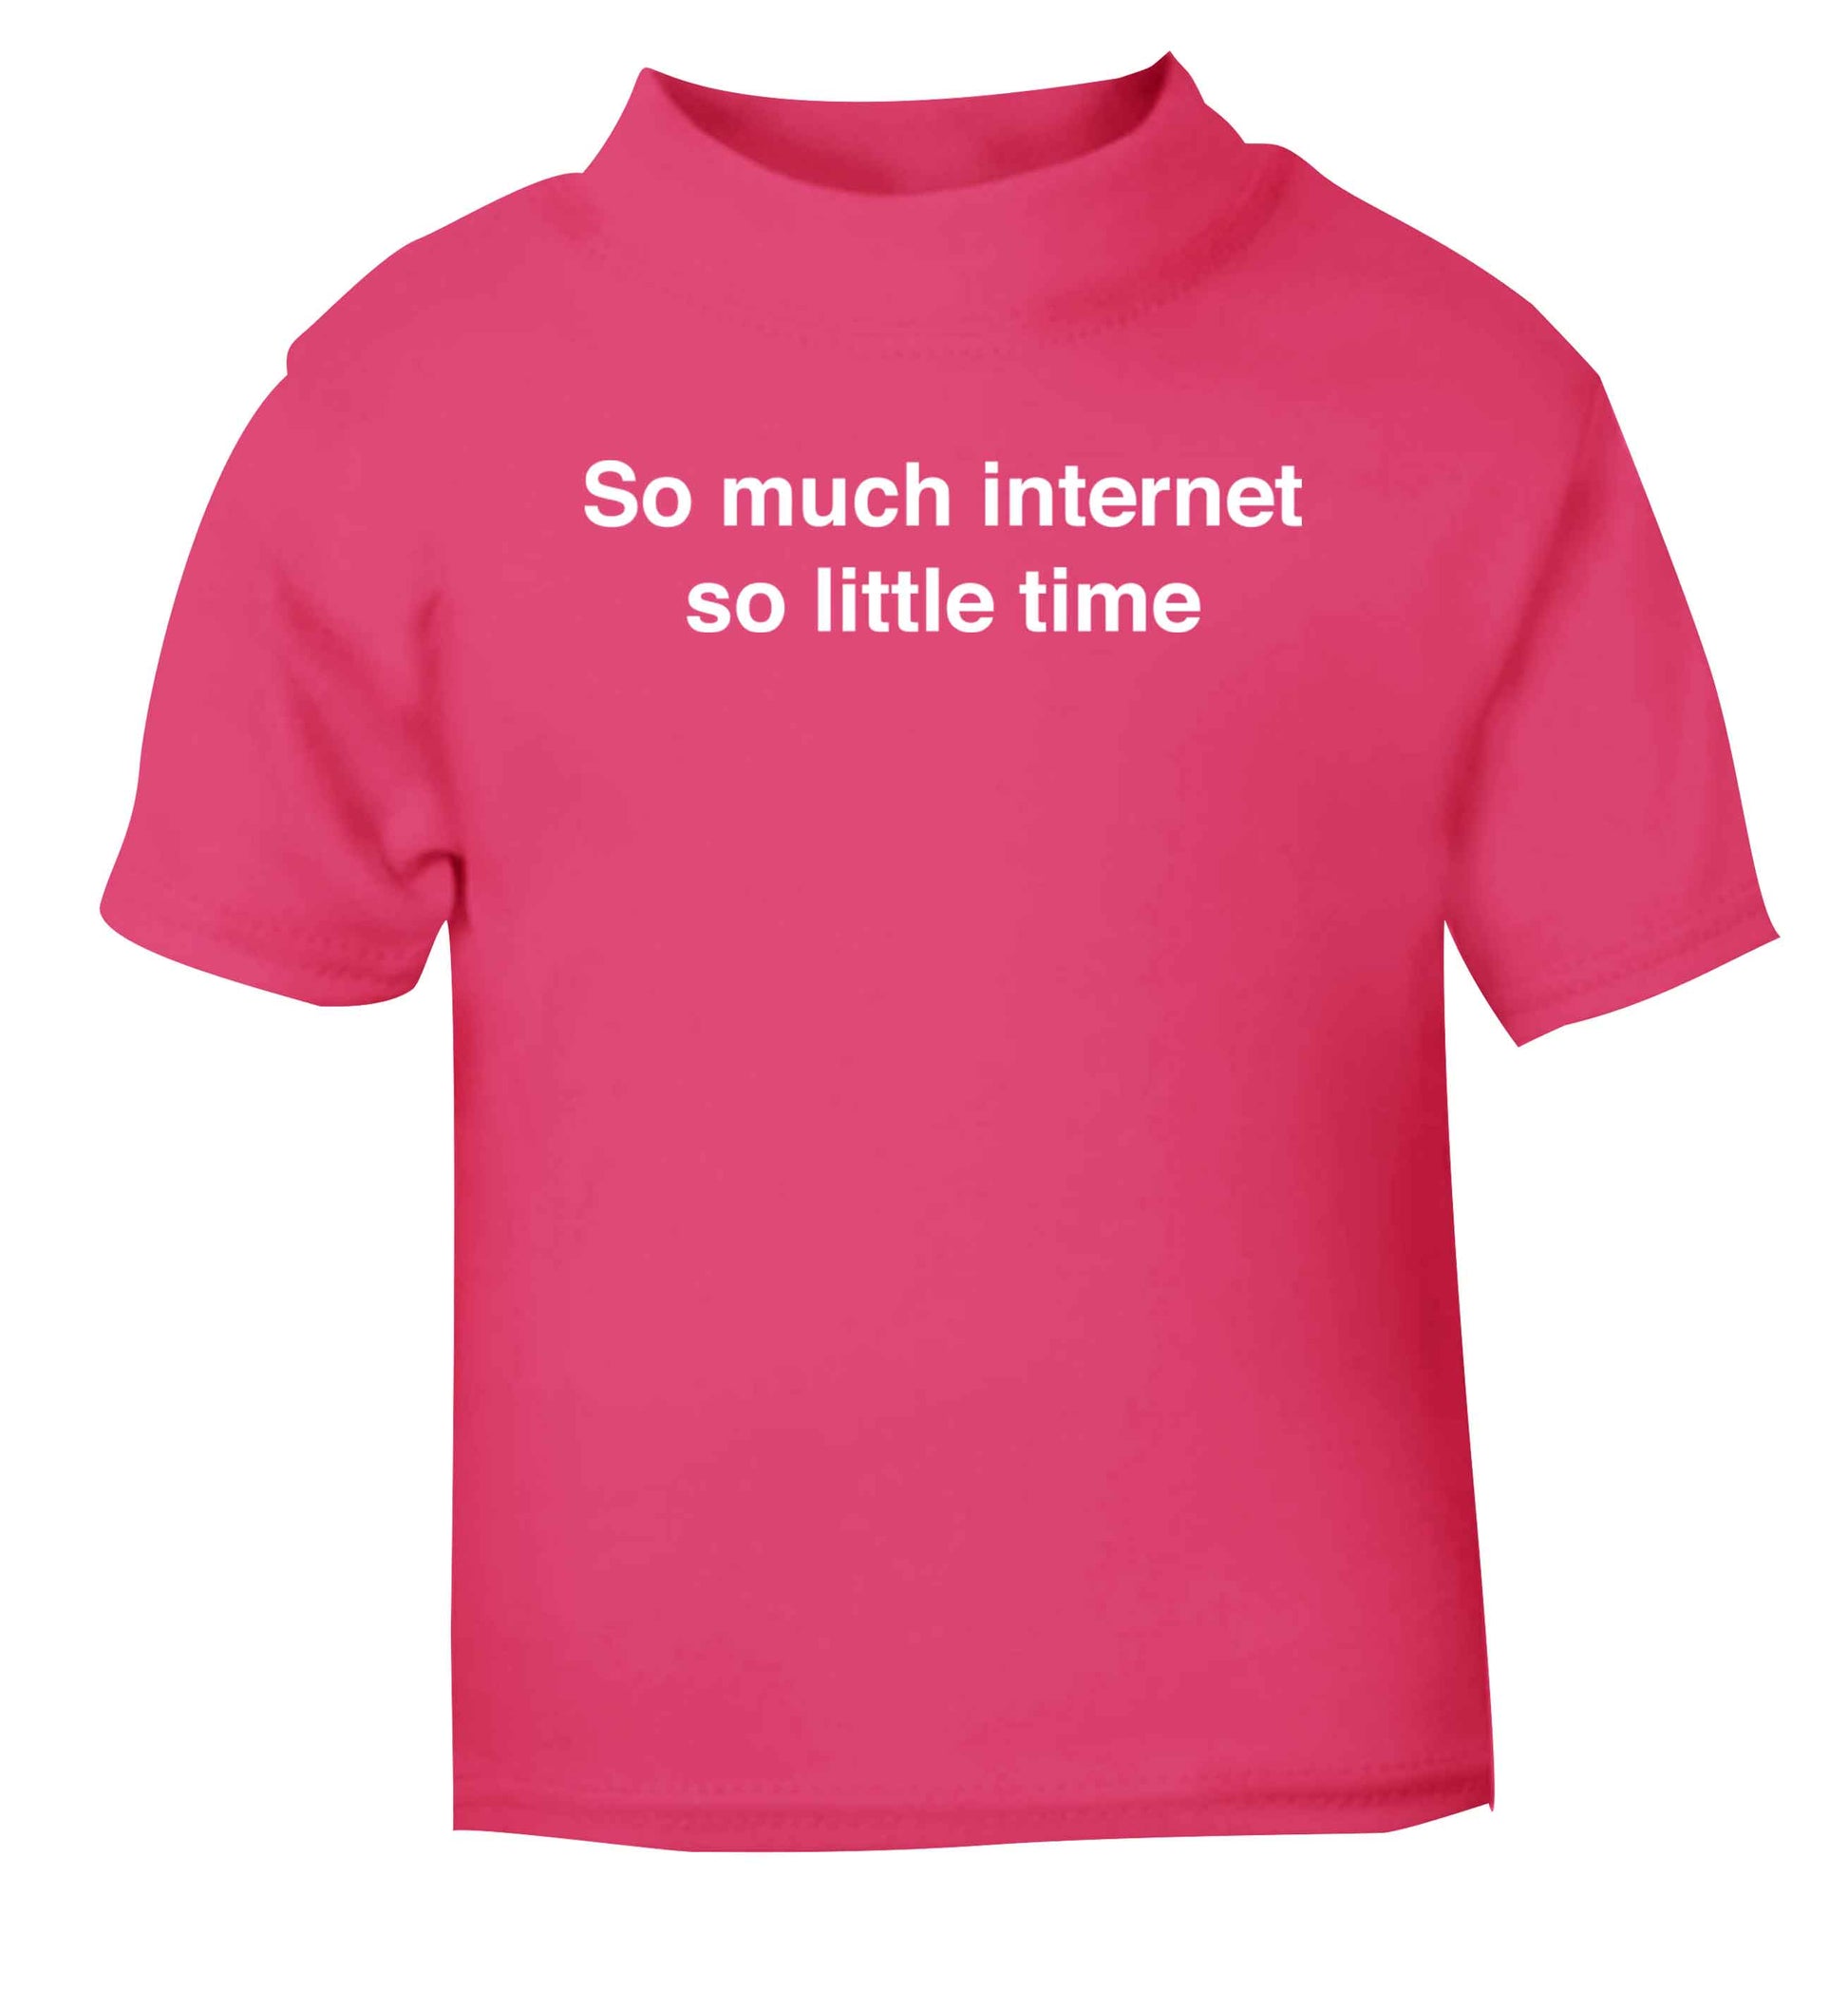 So much internet so little time pink baby toddler Tshirt 2 Years